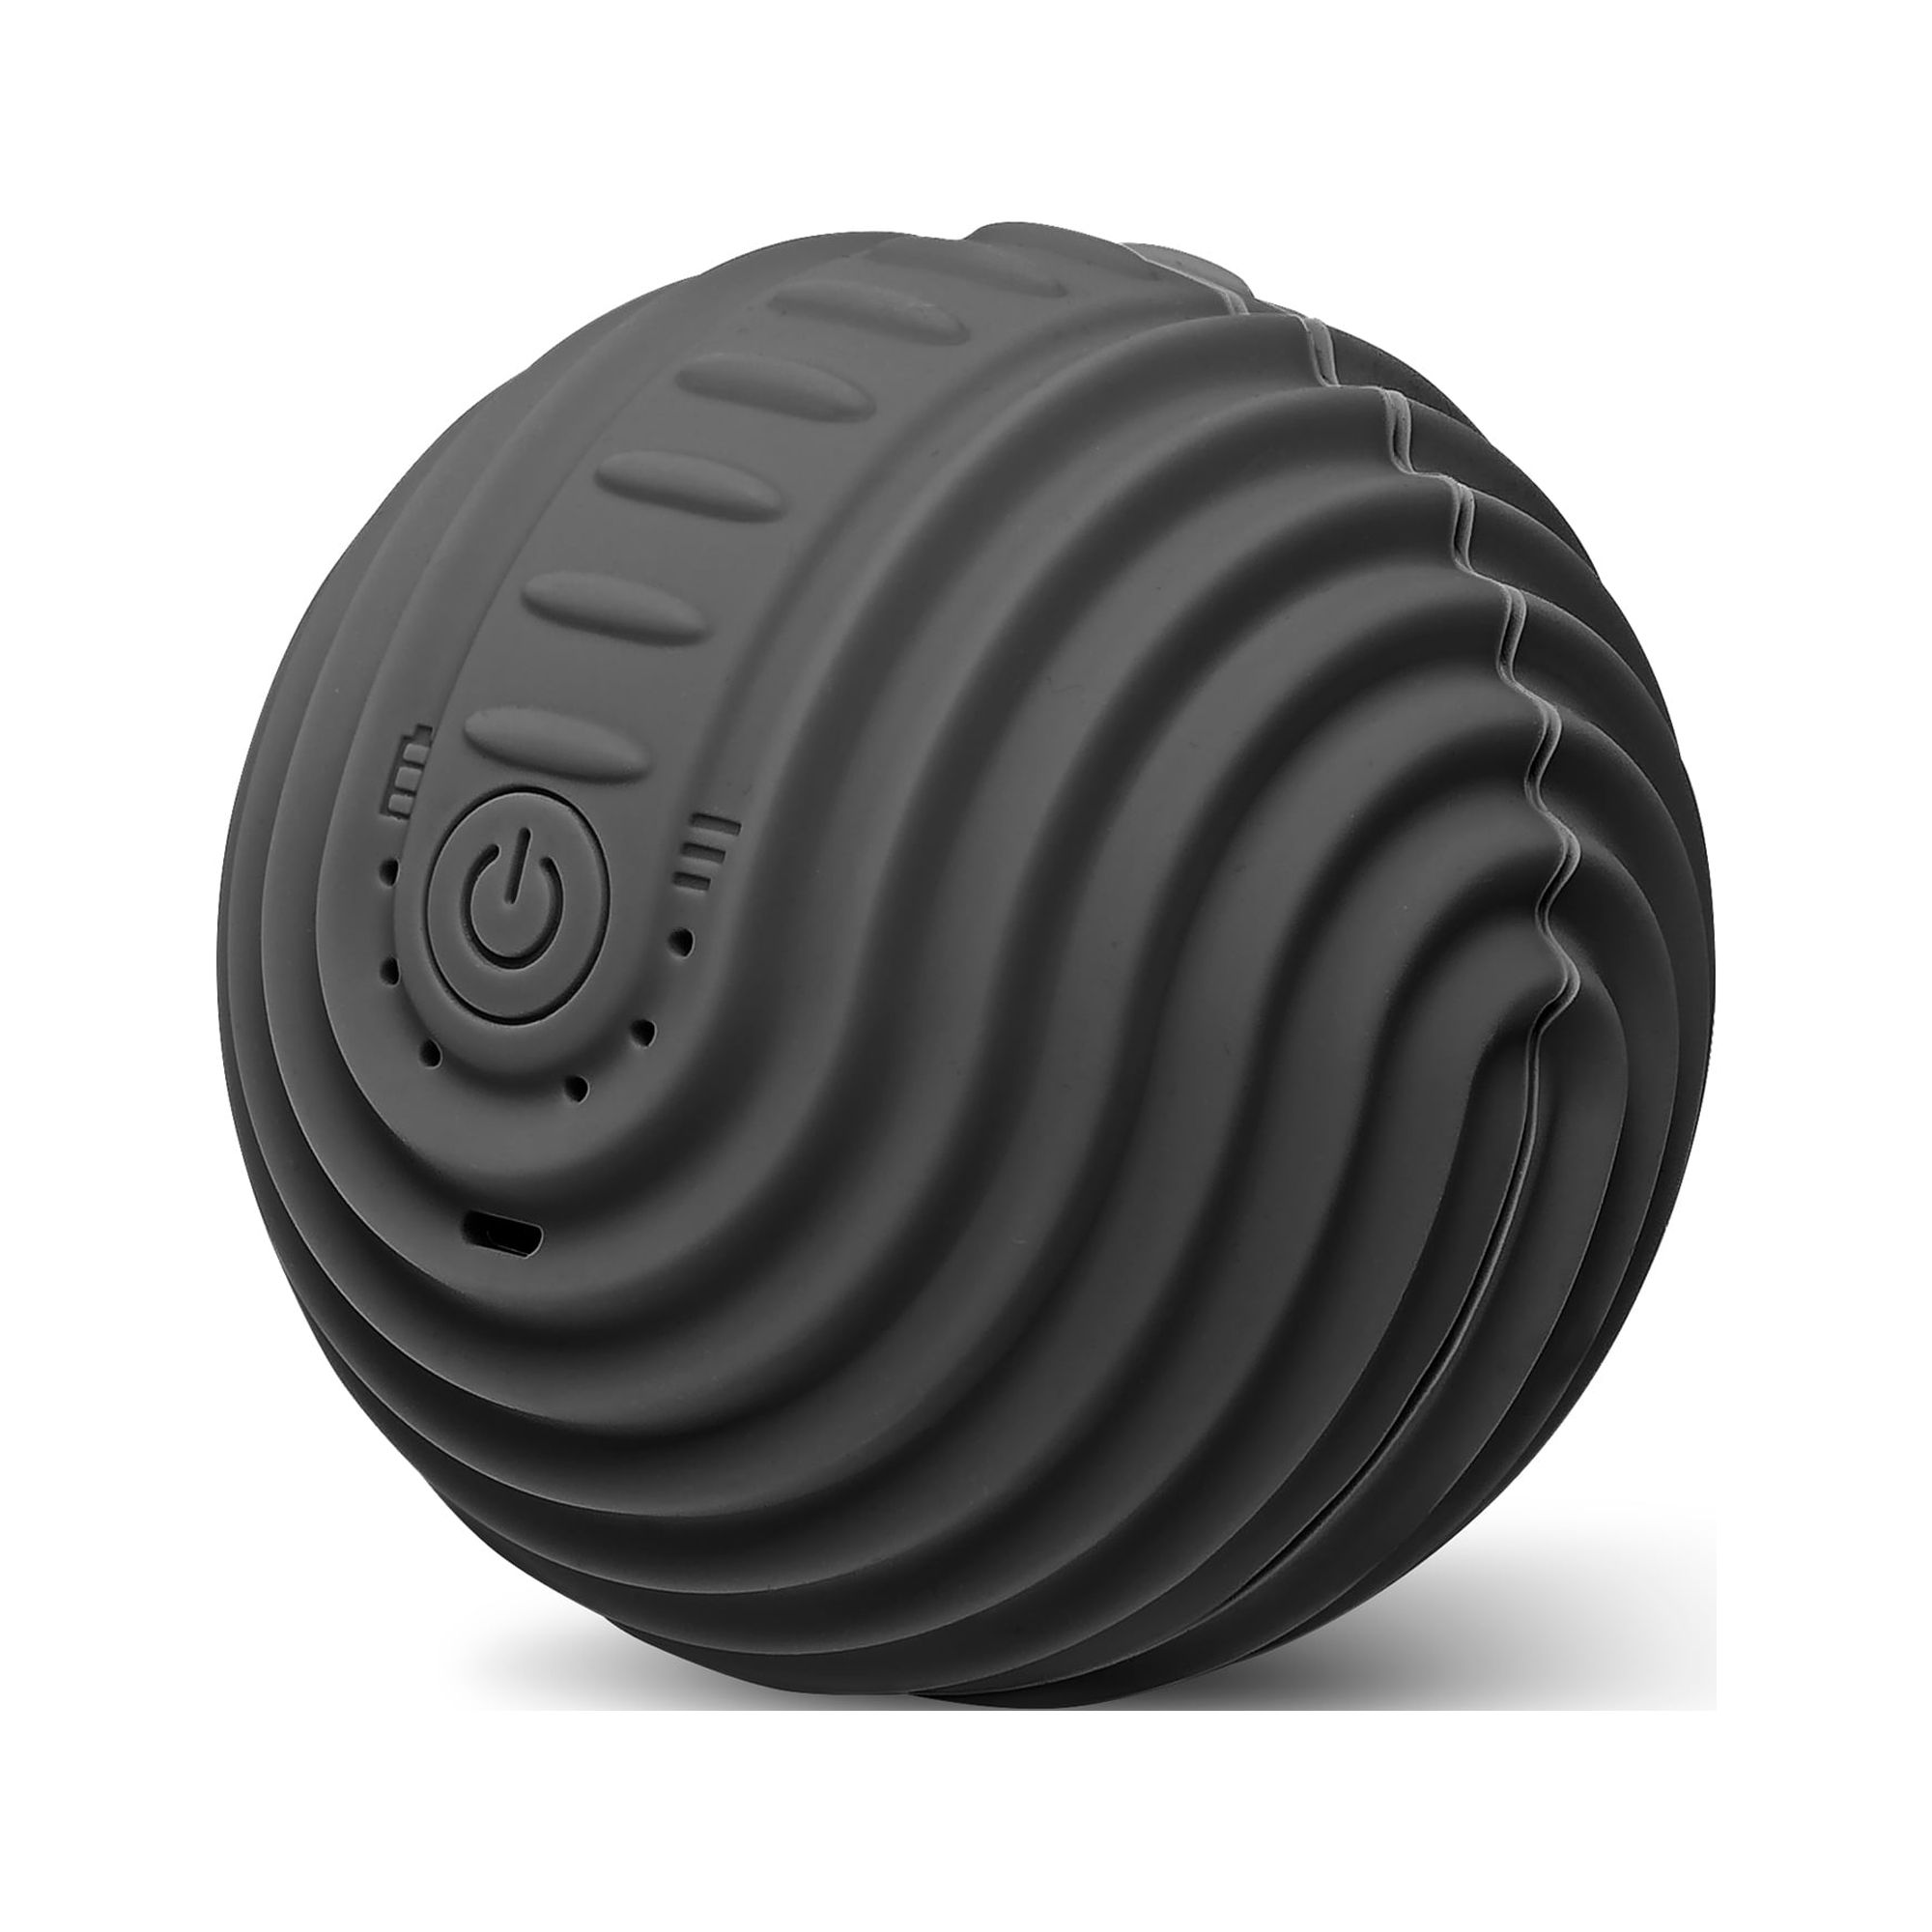 ELECTRO Vibrating Massage Ball Therapy Tool By Njoie  Black - image 1 of 12